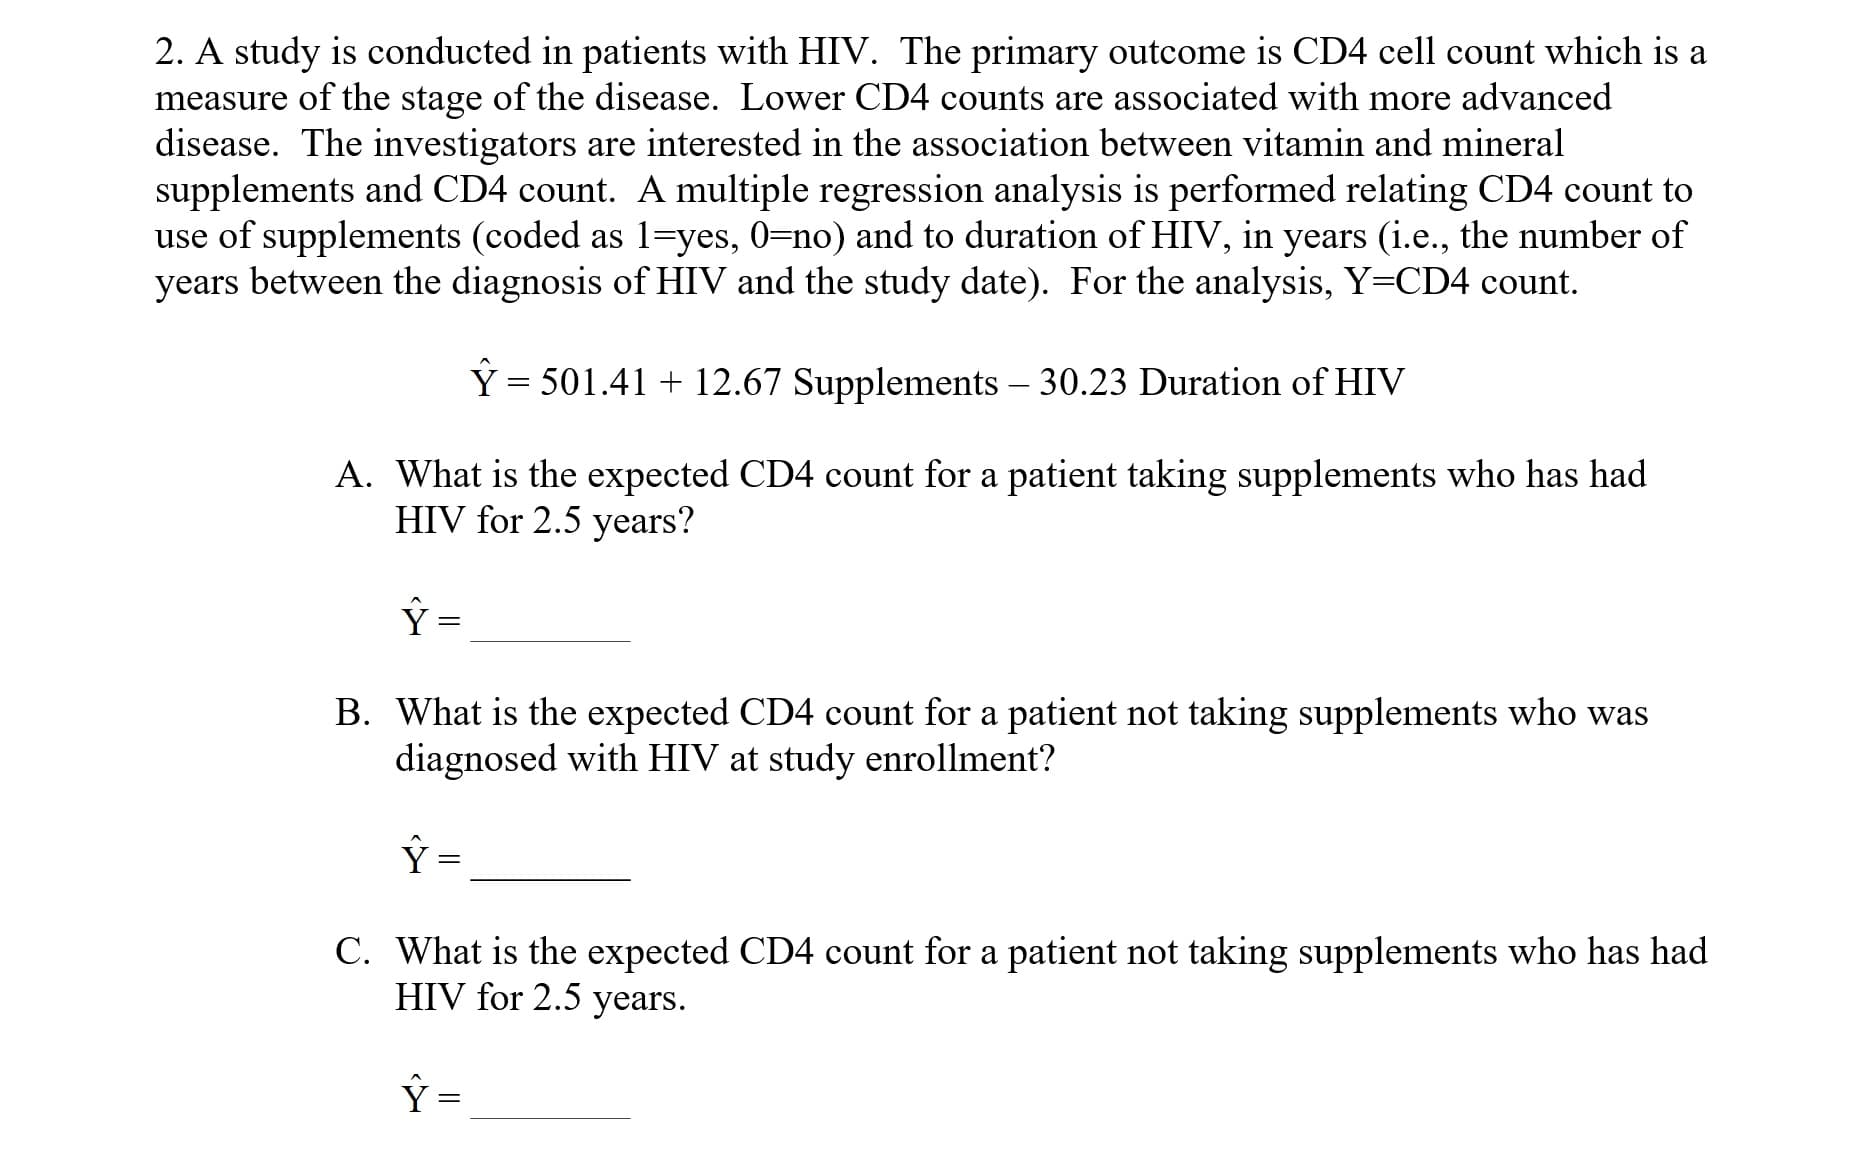 2. A study is conducted in patients with HIV. The primary outcome is CD4 cell count which is a
measure of the stage of the disease. Lower CD4 counts are associated with more advanced
disease. The investigators are interested in the association between vitamin and mineral
supplements and CD4 count. A multiple regression analysis is performed relating CD4 count to
use of supplements(coded as l ves, 0-no) and to duration of HIV, in years(ie., the number of
years between the diagnosis of HIV and the study date). For the analysis, Y-CD4 count.
Y 501.41
12.67 Supplements - 30.23 Duration of HIV
A. What is the expected CD4 count for a patient taking supplements who has had
HIV for 2.5 years?
B. What is the expected CD4 count for a patient not taking supplements who was
diagnosed with HIV at study enrollment?
C. What is the expected CD4 count for a patient not taking supplements who has had
HIV for 2.5 years
